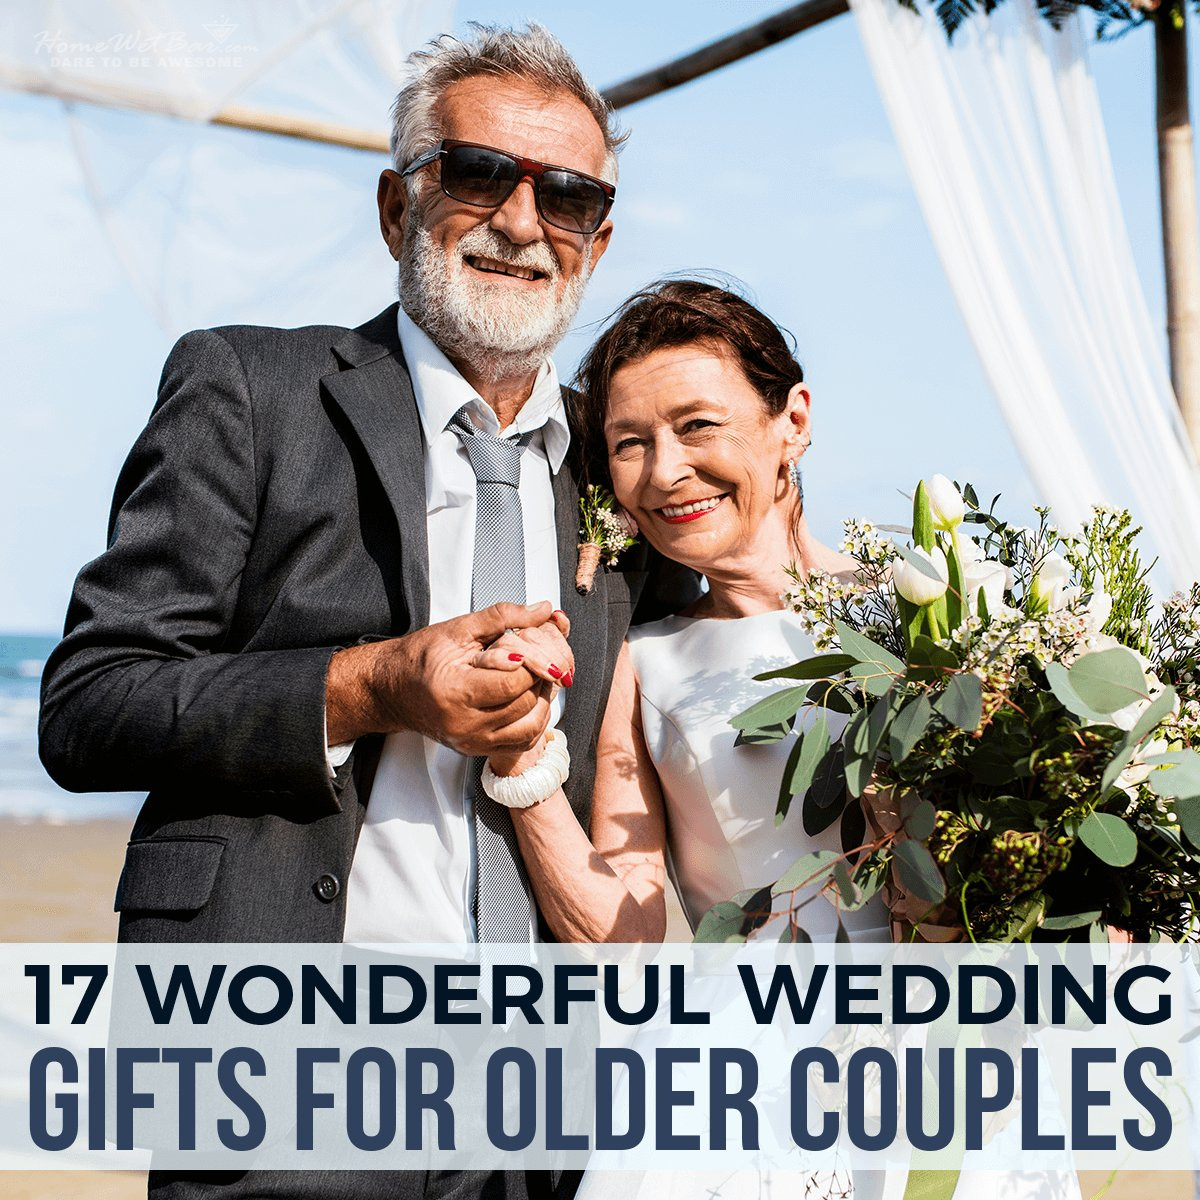 Gift Ideas For Elderly Couple
 17 Wonderful Wedding Gifts for Older Couples